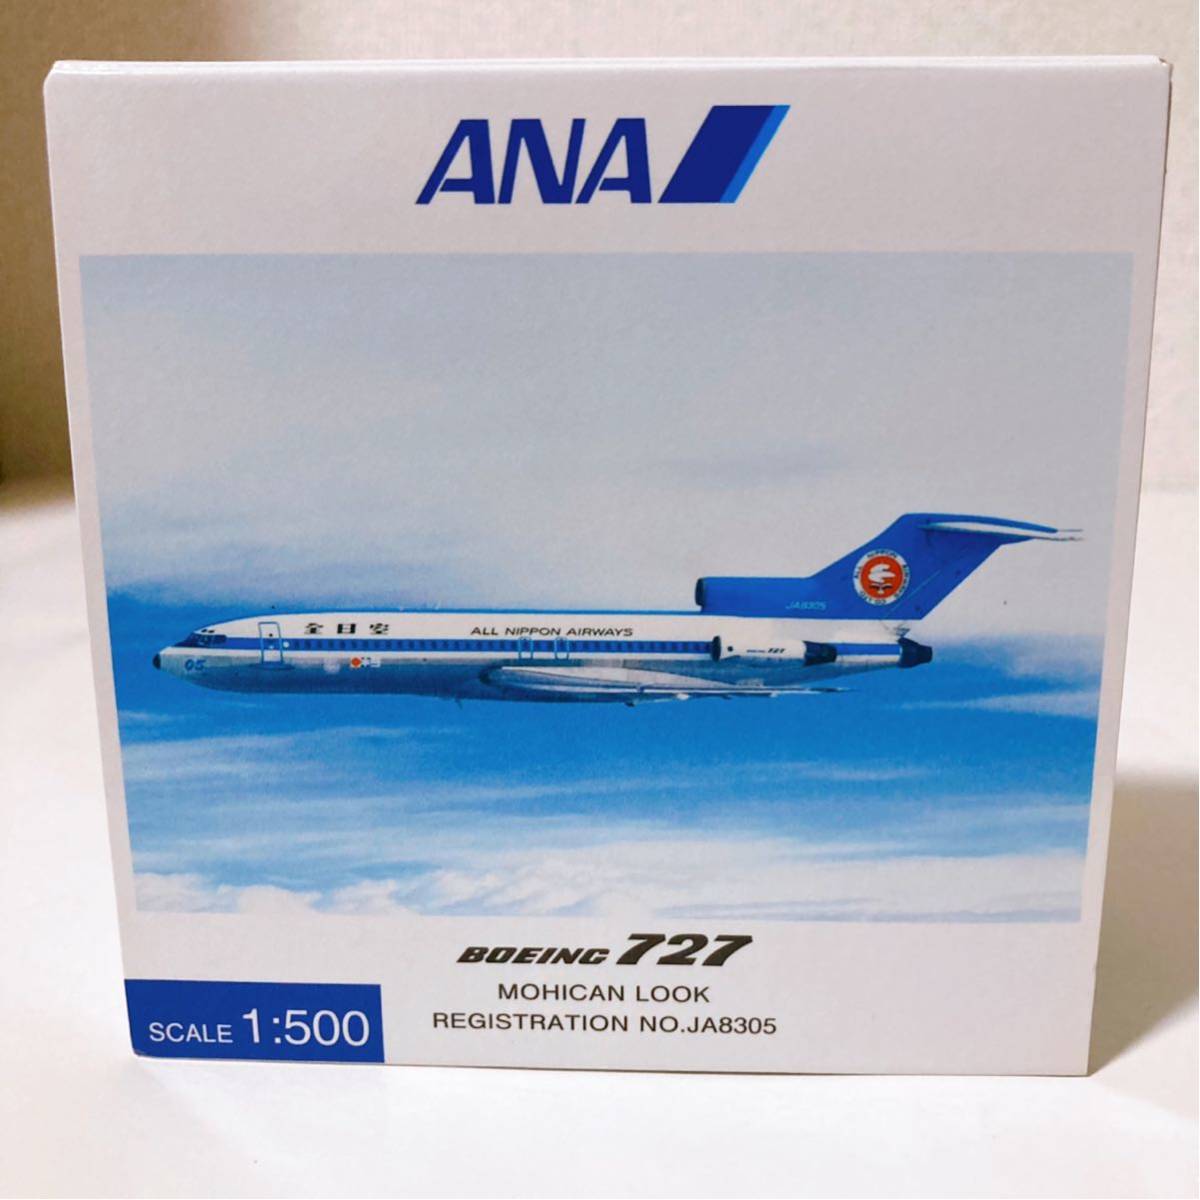 ANA ボーイング 727 1/500 【全日空商事 BOEING 727 MOHICAN LOOK 